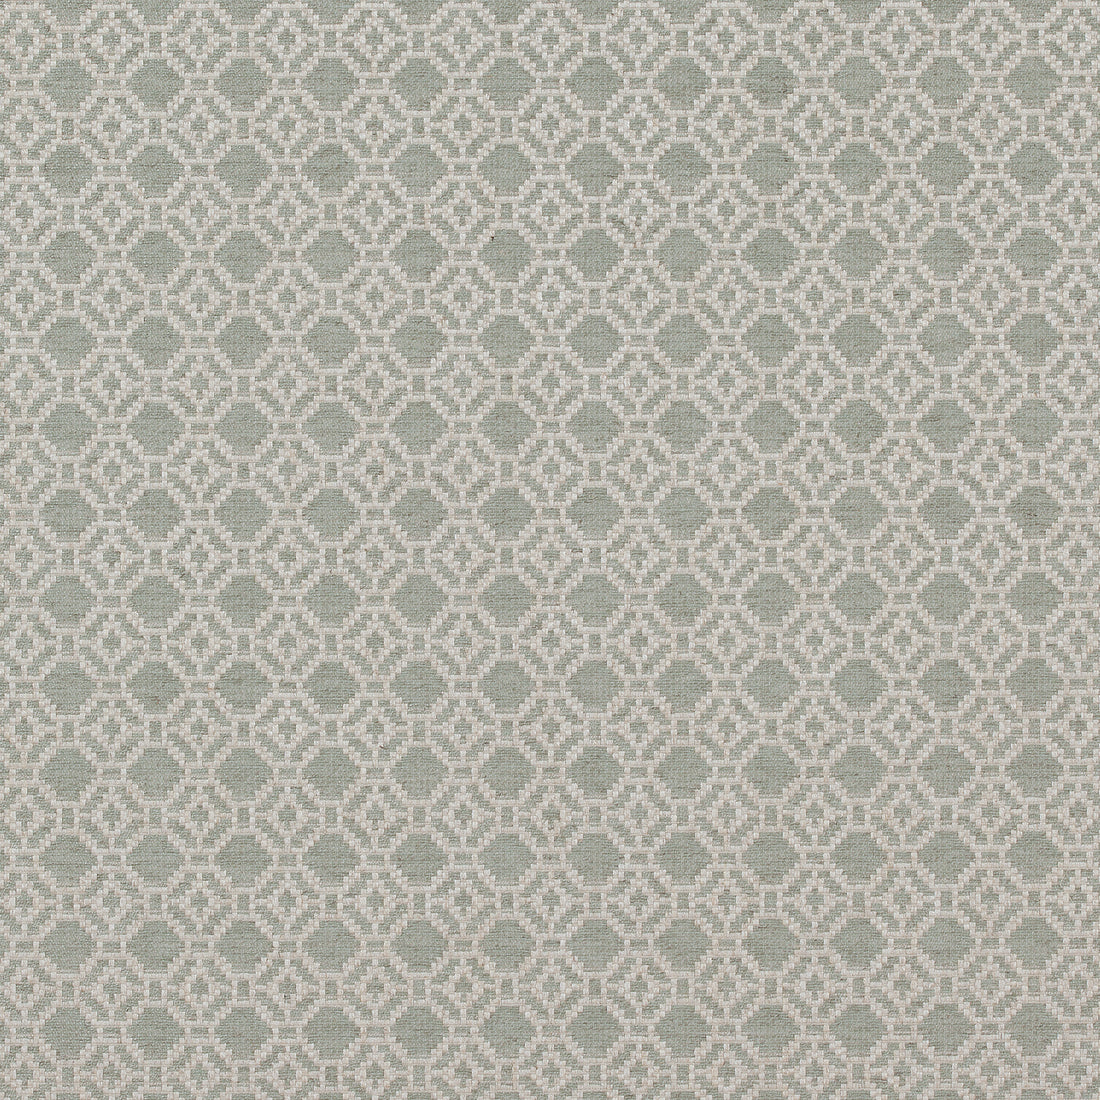 Amalfi fabric in sage color - pattern number AW73038 - by Anna French in the Meridian collection